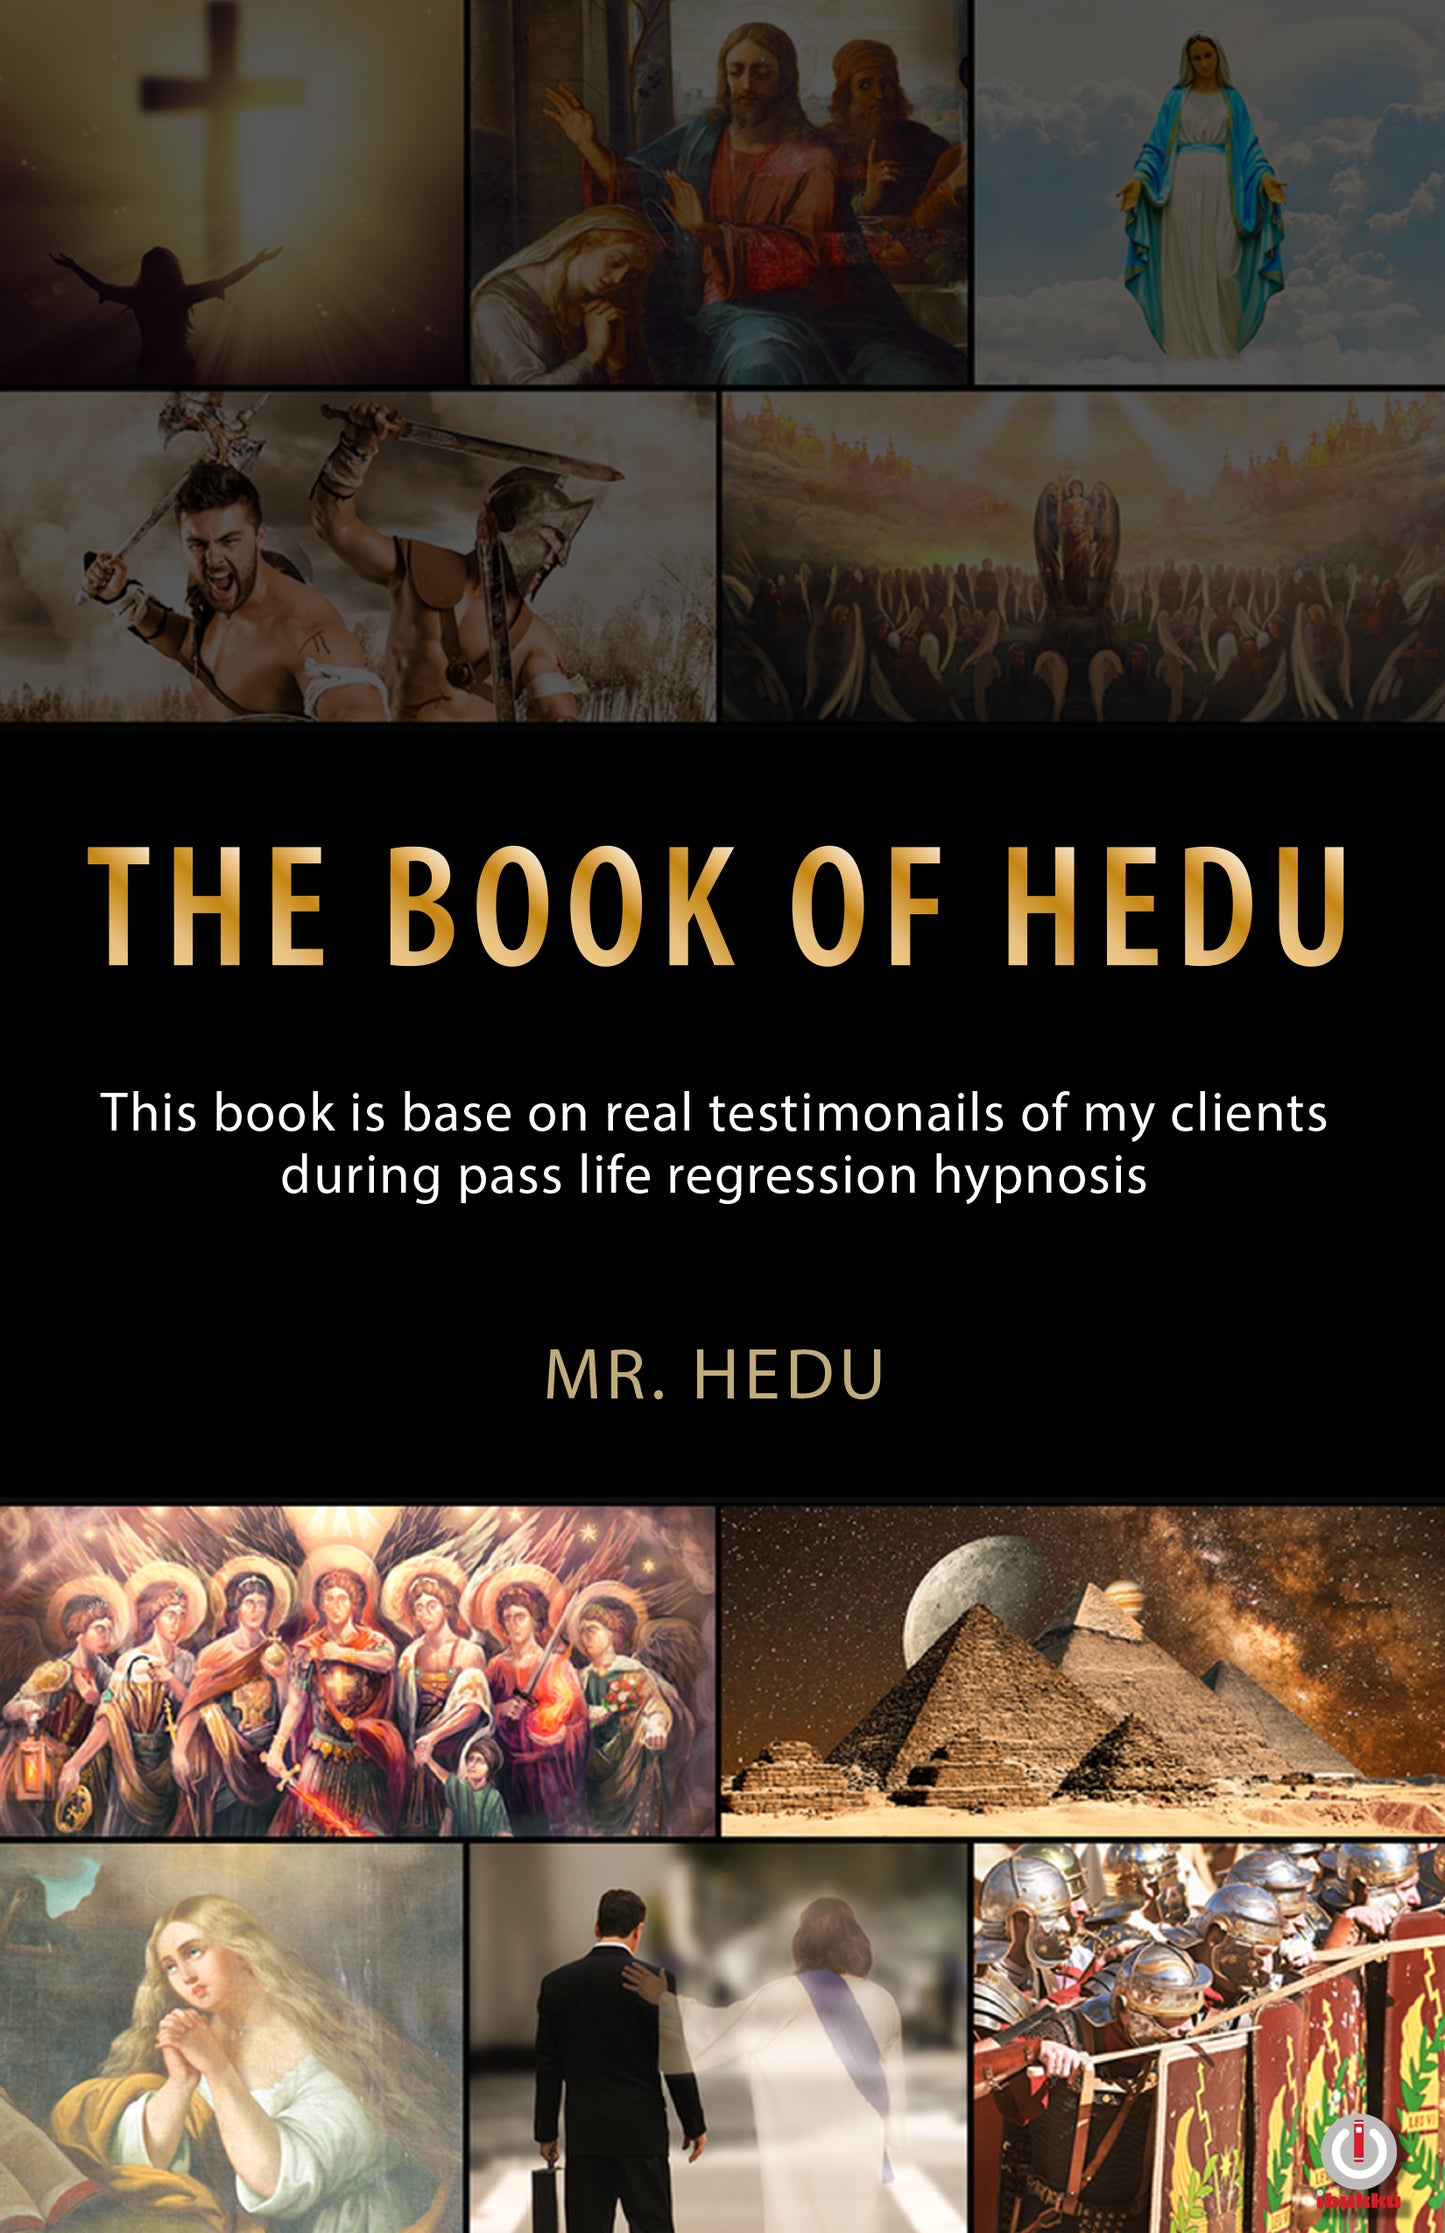 The Book Of Hedu: Insights from Past Life Regressions A Study of 17 Clients Journeys into Their Past Lives